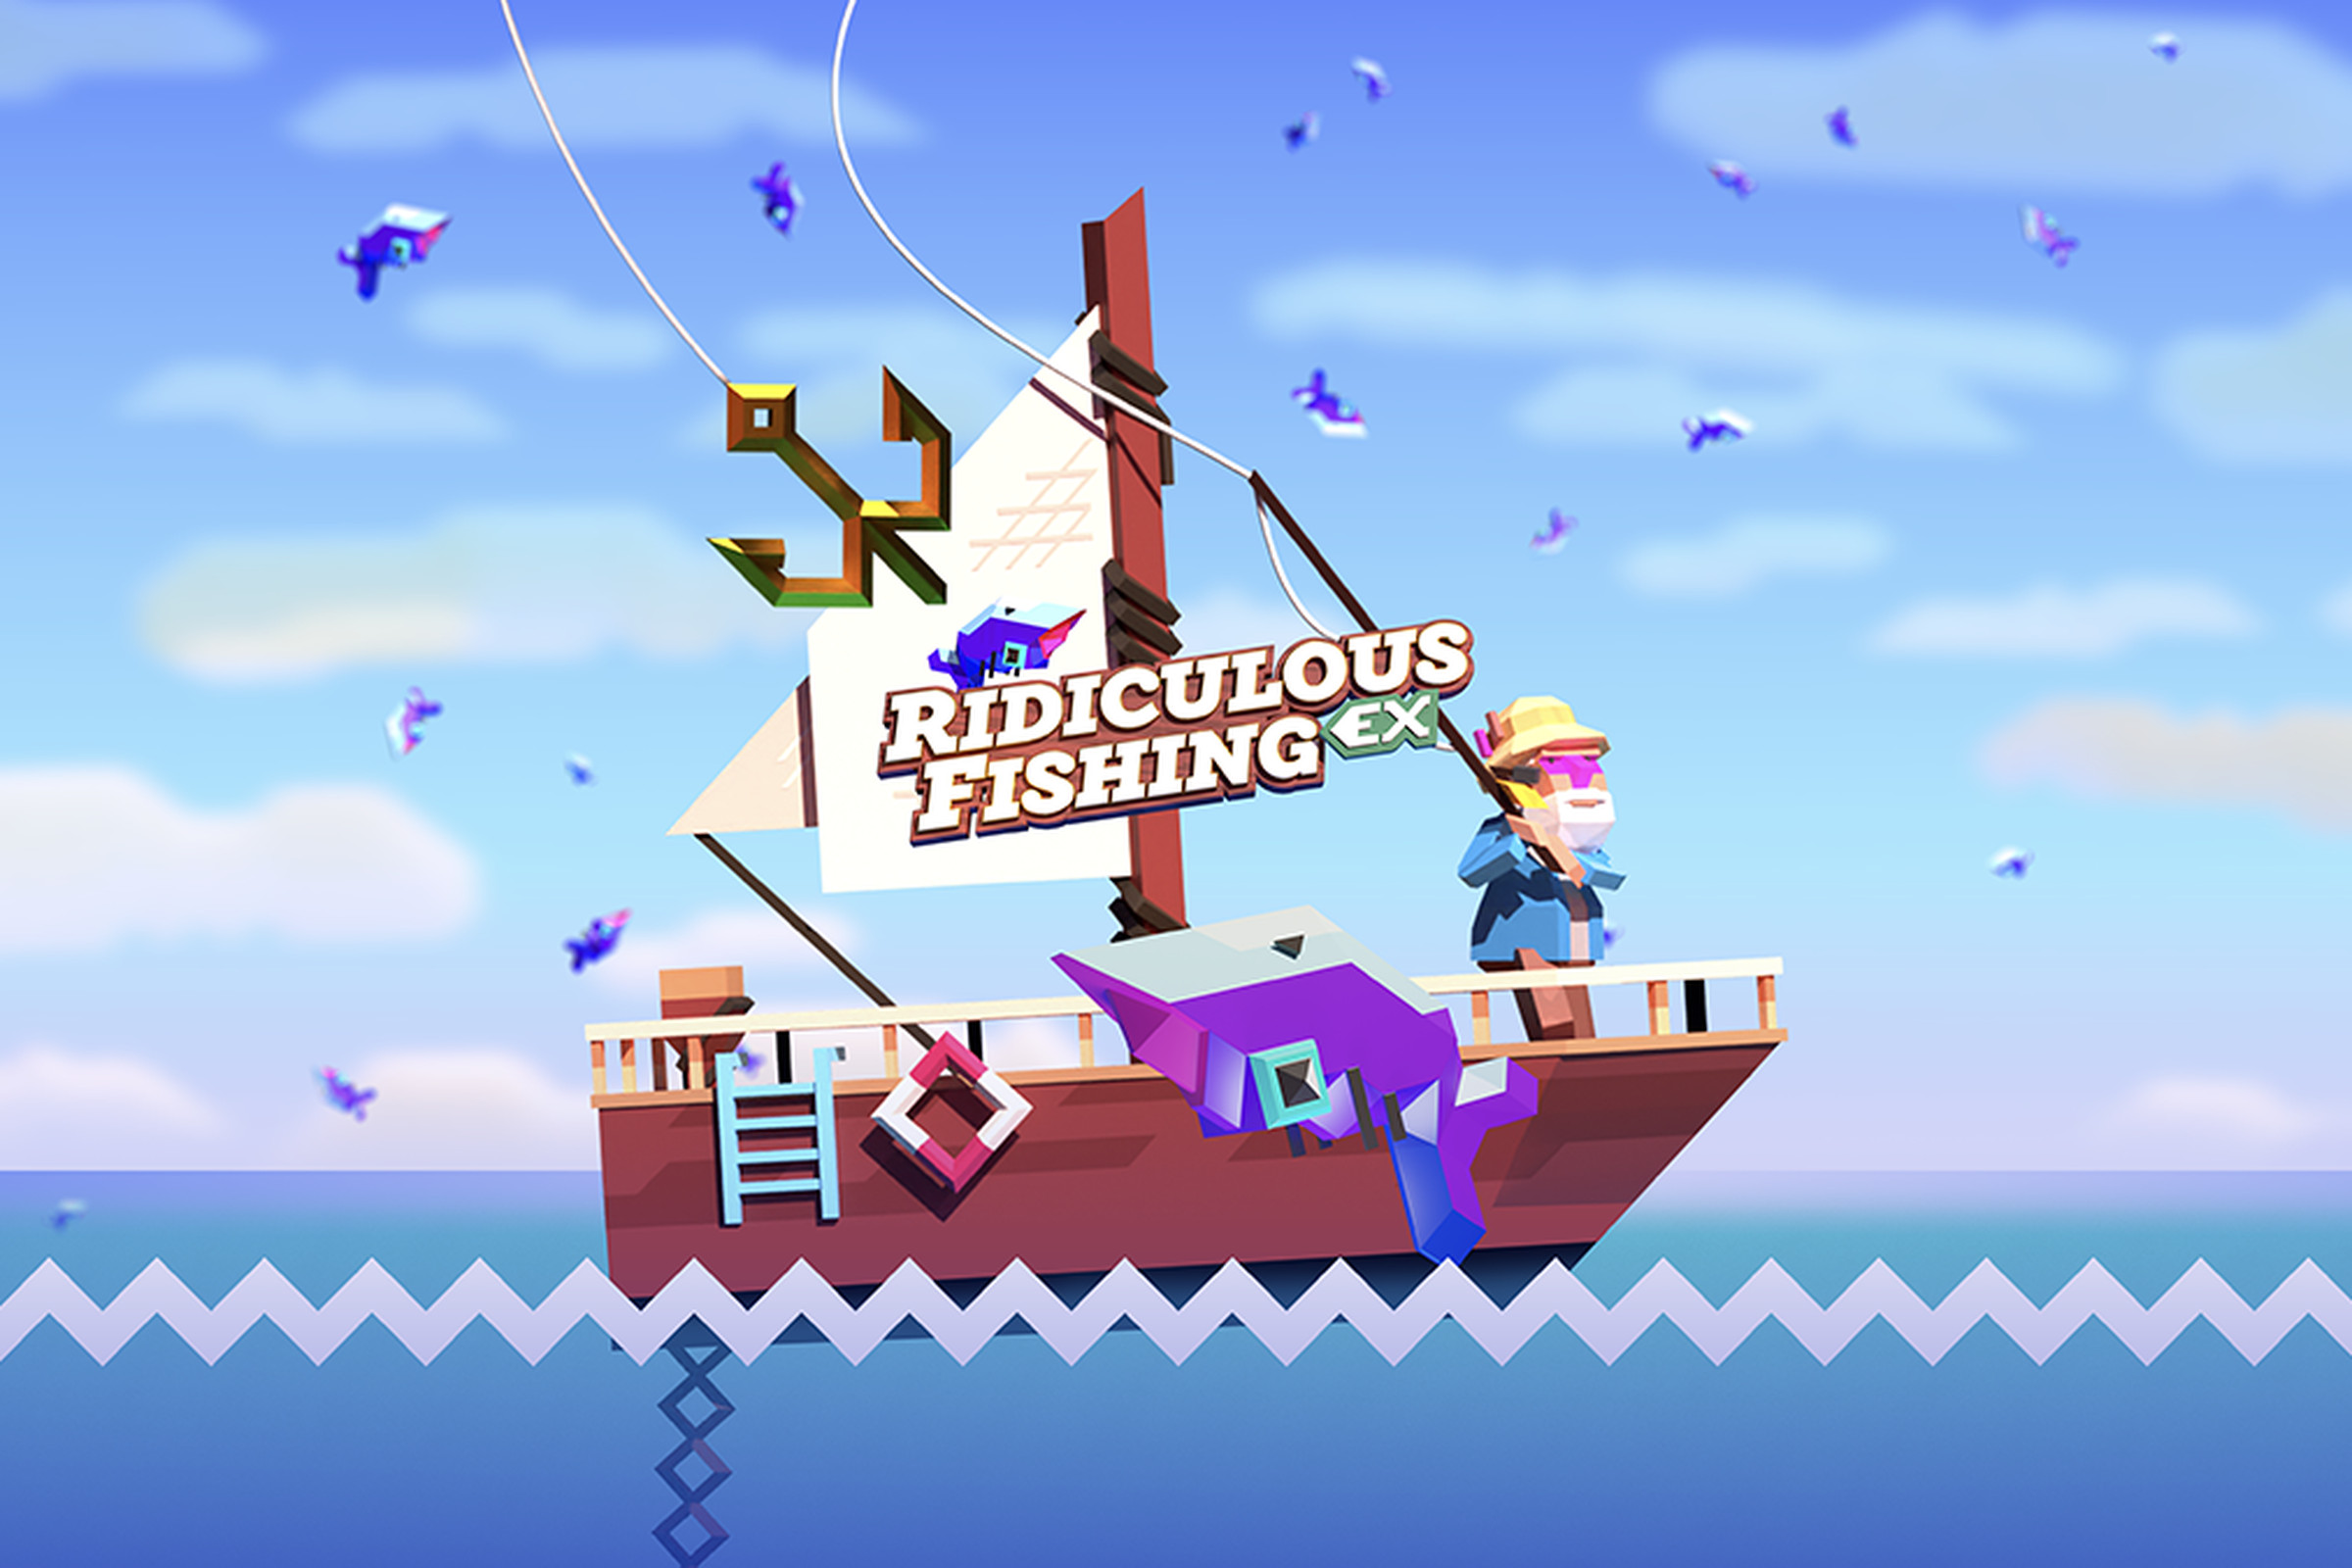 A screenshot from the mobile video game Ridiculous Fishing EX.